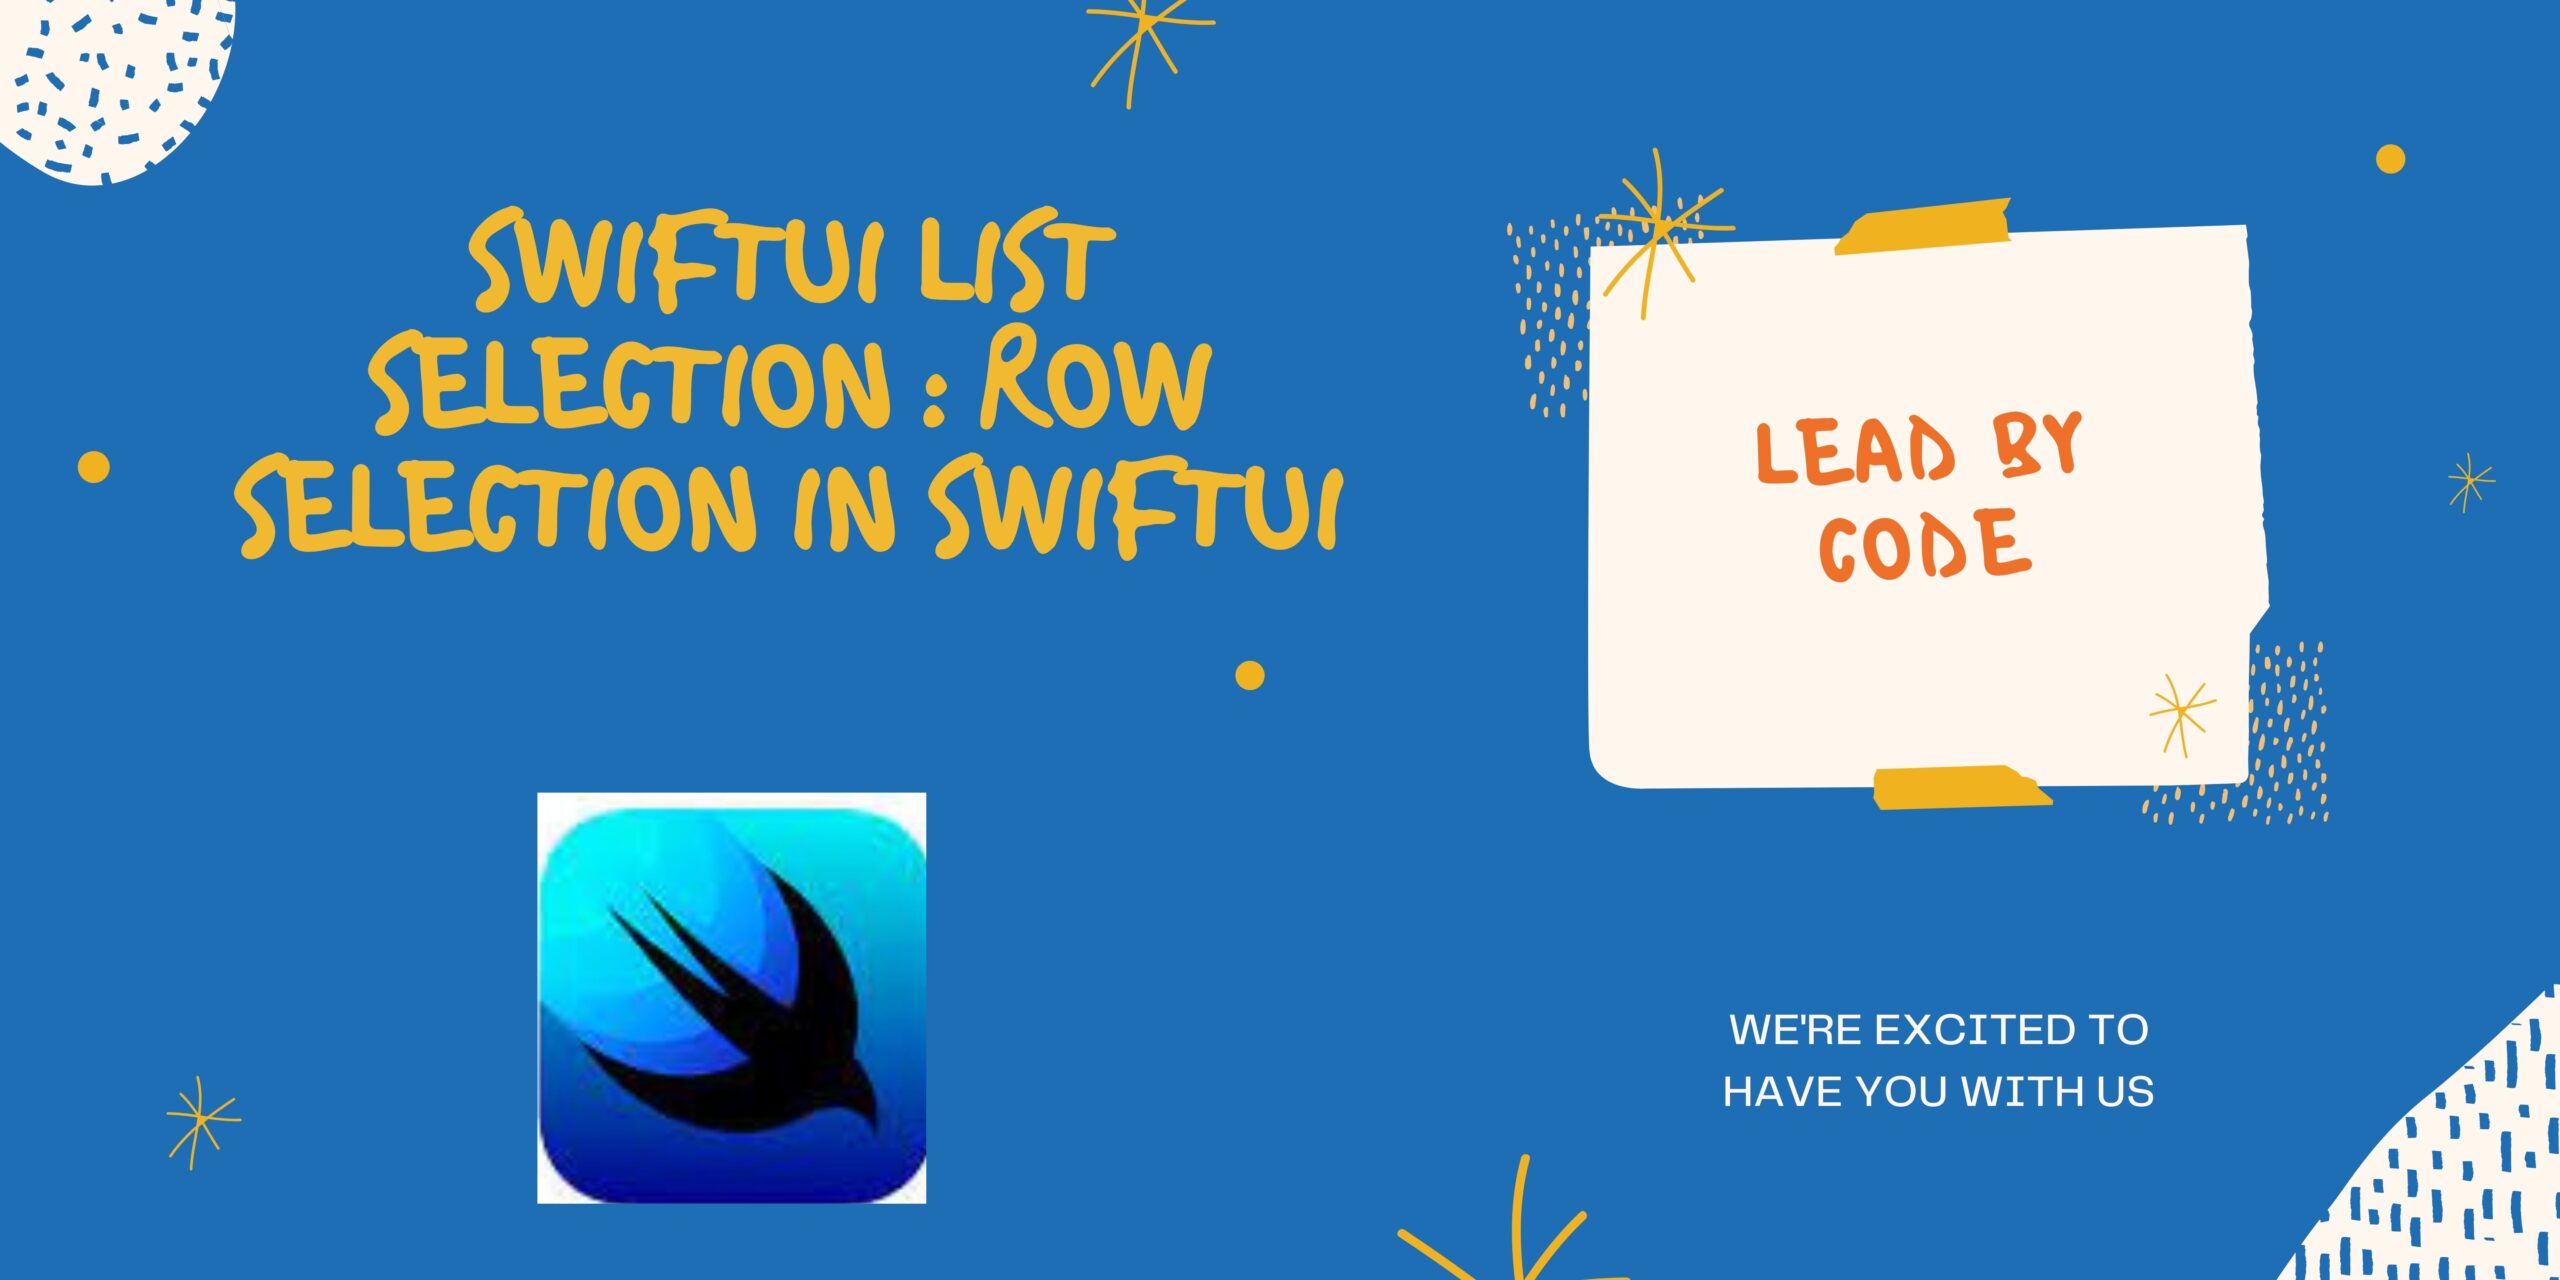 Swiftui list Selection : Row Selection in SwiftUI